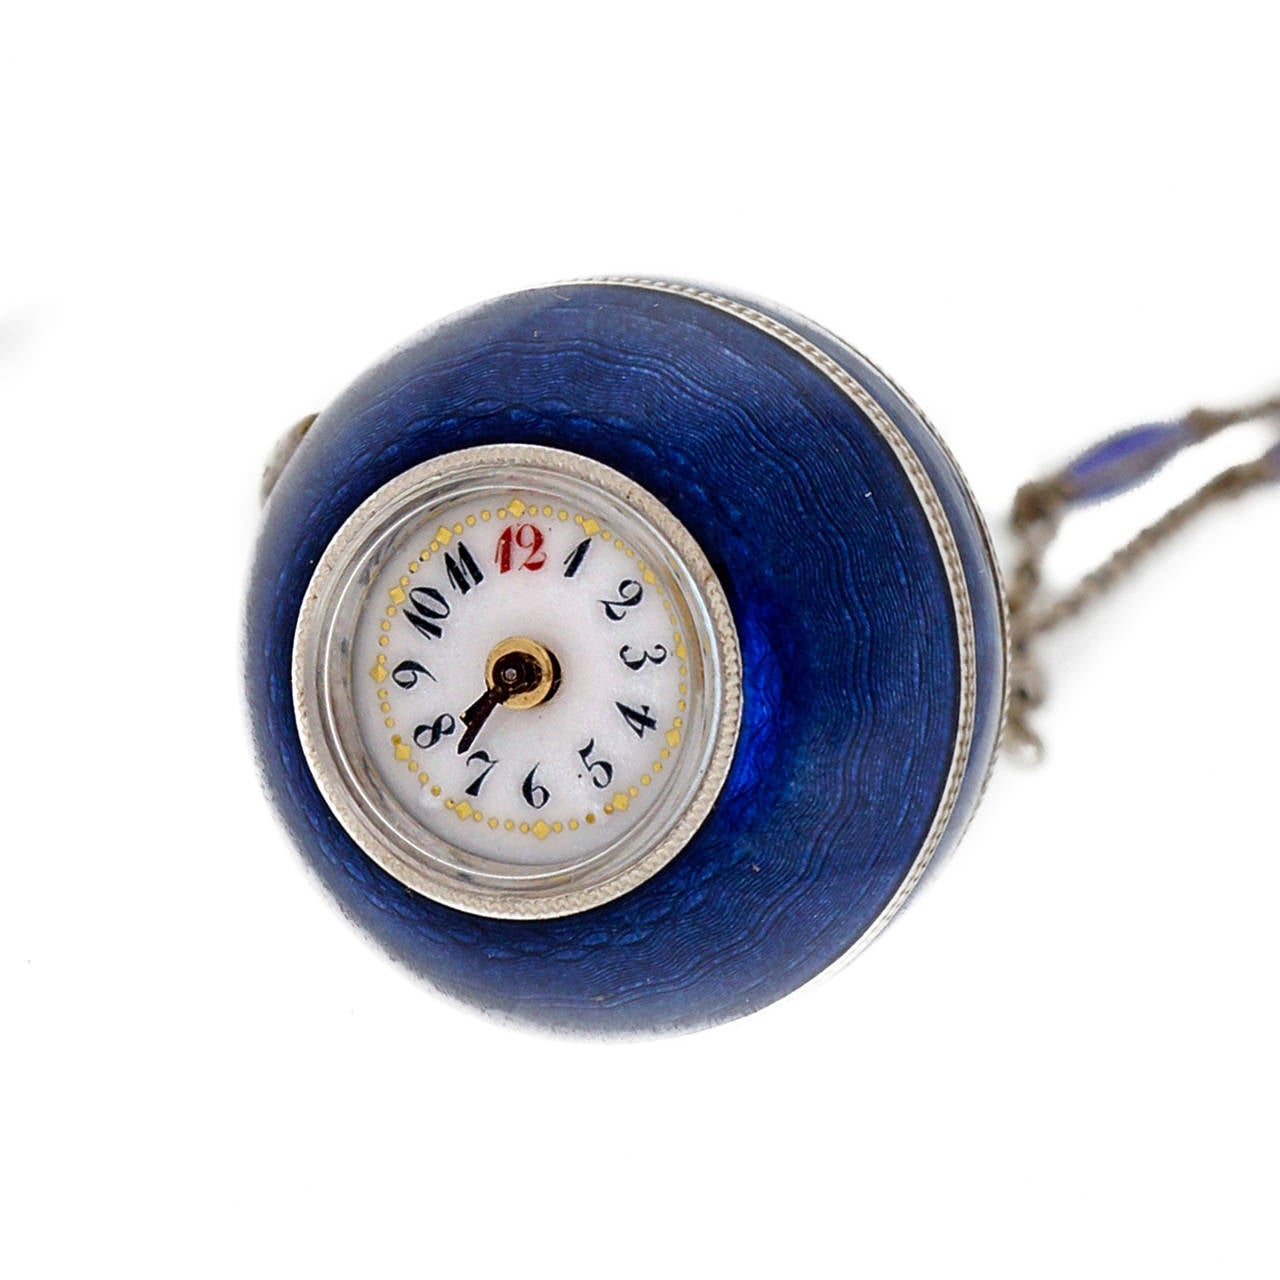 Blue enamel ball watch necklace. Original blue enamel ball, circa 1890. Lever set on side. Winds by turning the bottom half of the watch. Porcelain enamel dial.

Silver
29.0 grams
Enamel
29.0 grams
24 inch silver chain with blue enamel bars and